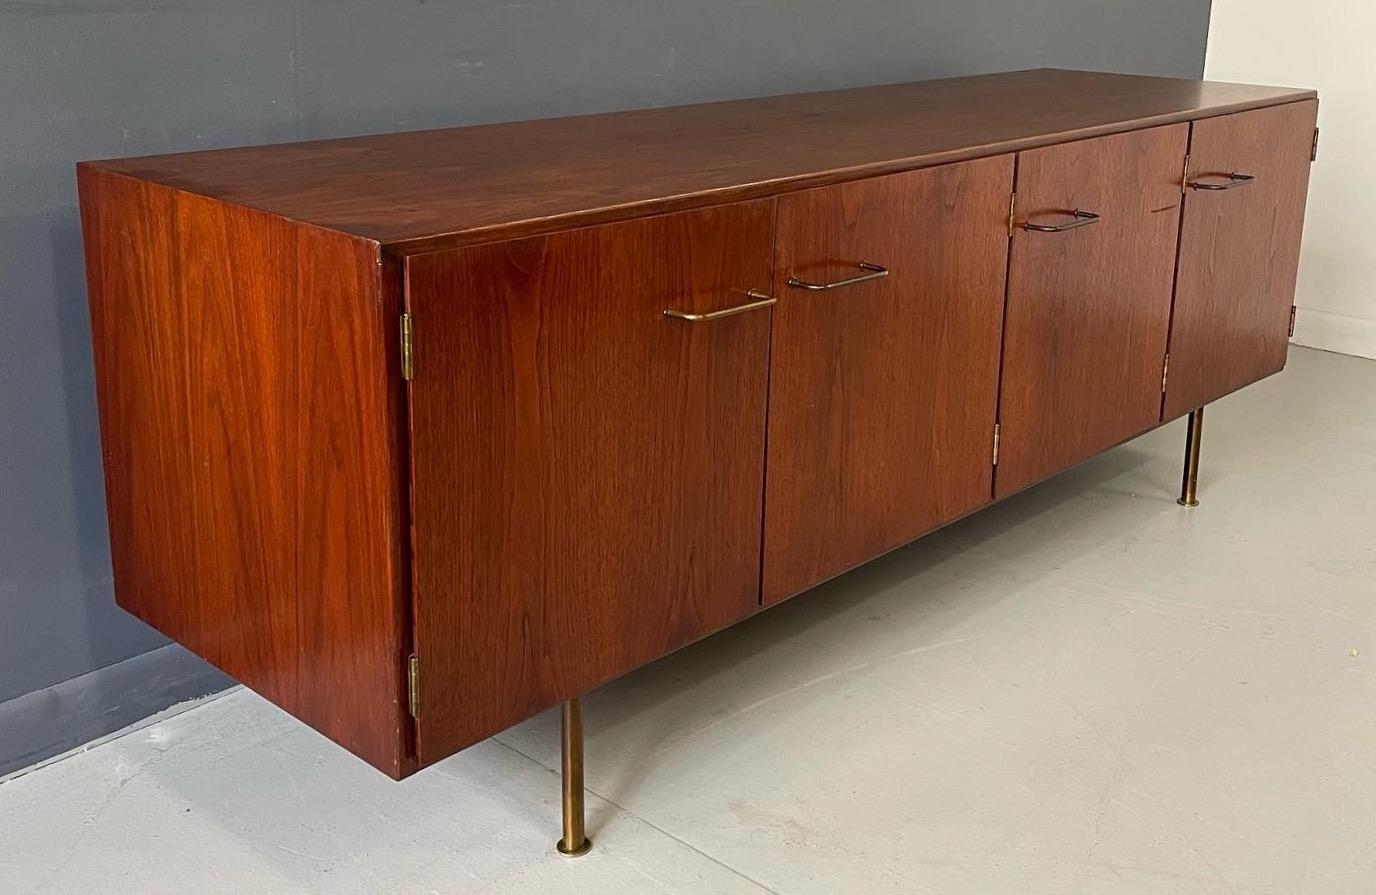 This is an early Jens Risom solid walnut credenza that has four doors each revealing a space with one shelf. Brass pulls and brass cylinder legs make this credenza special.